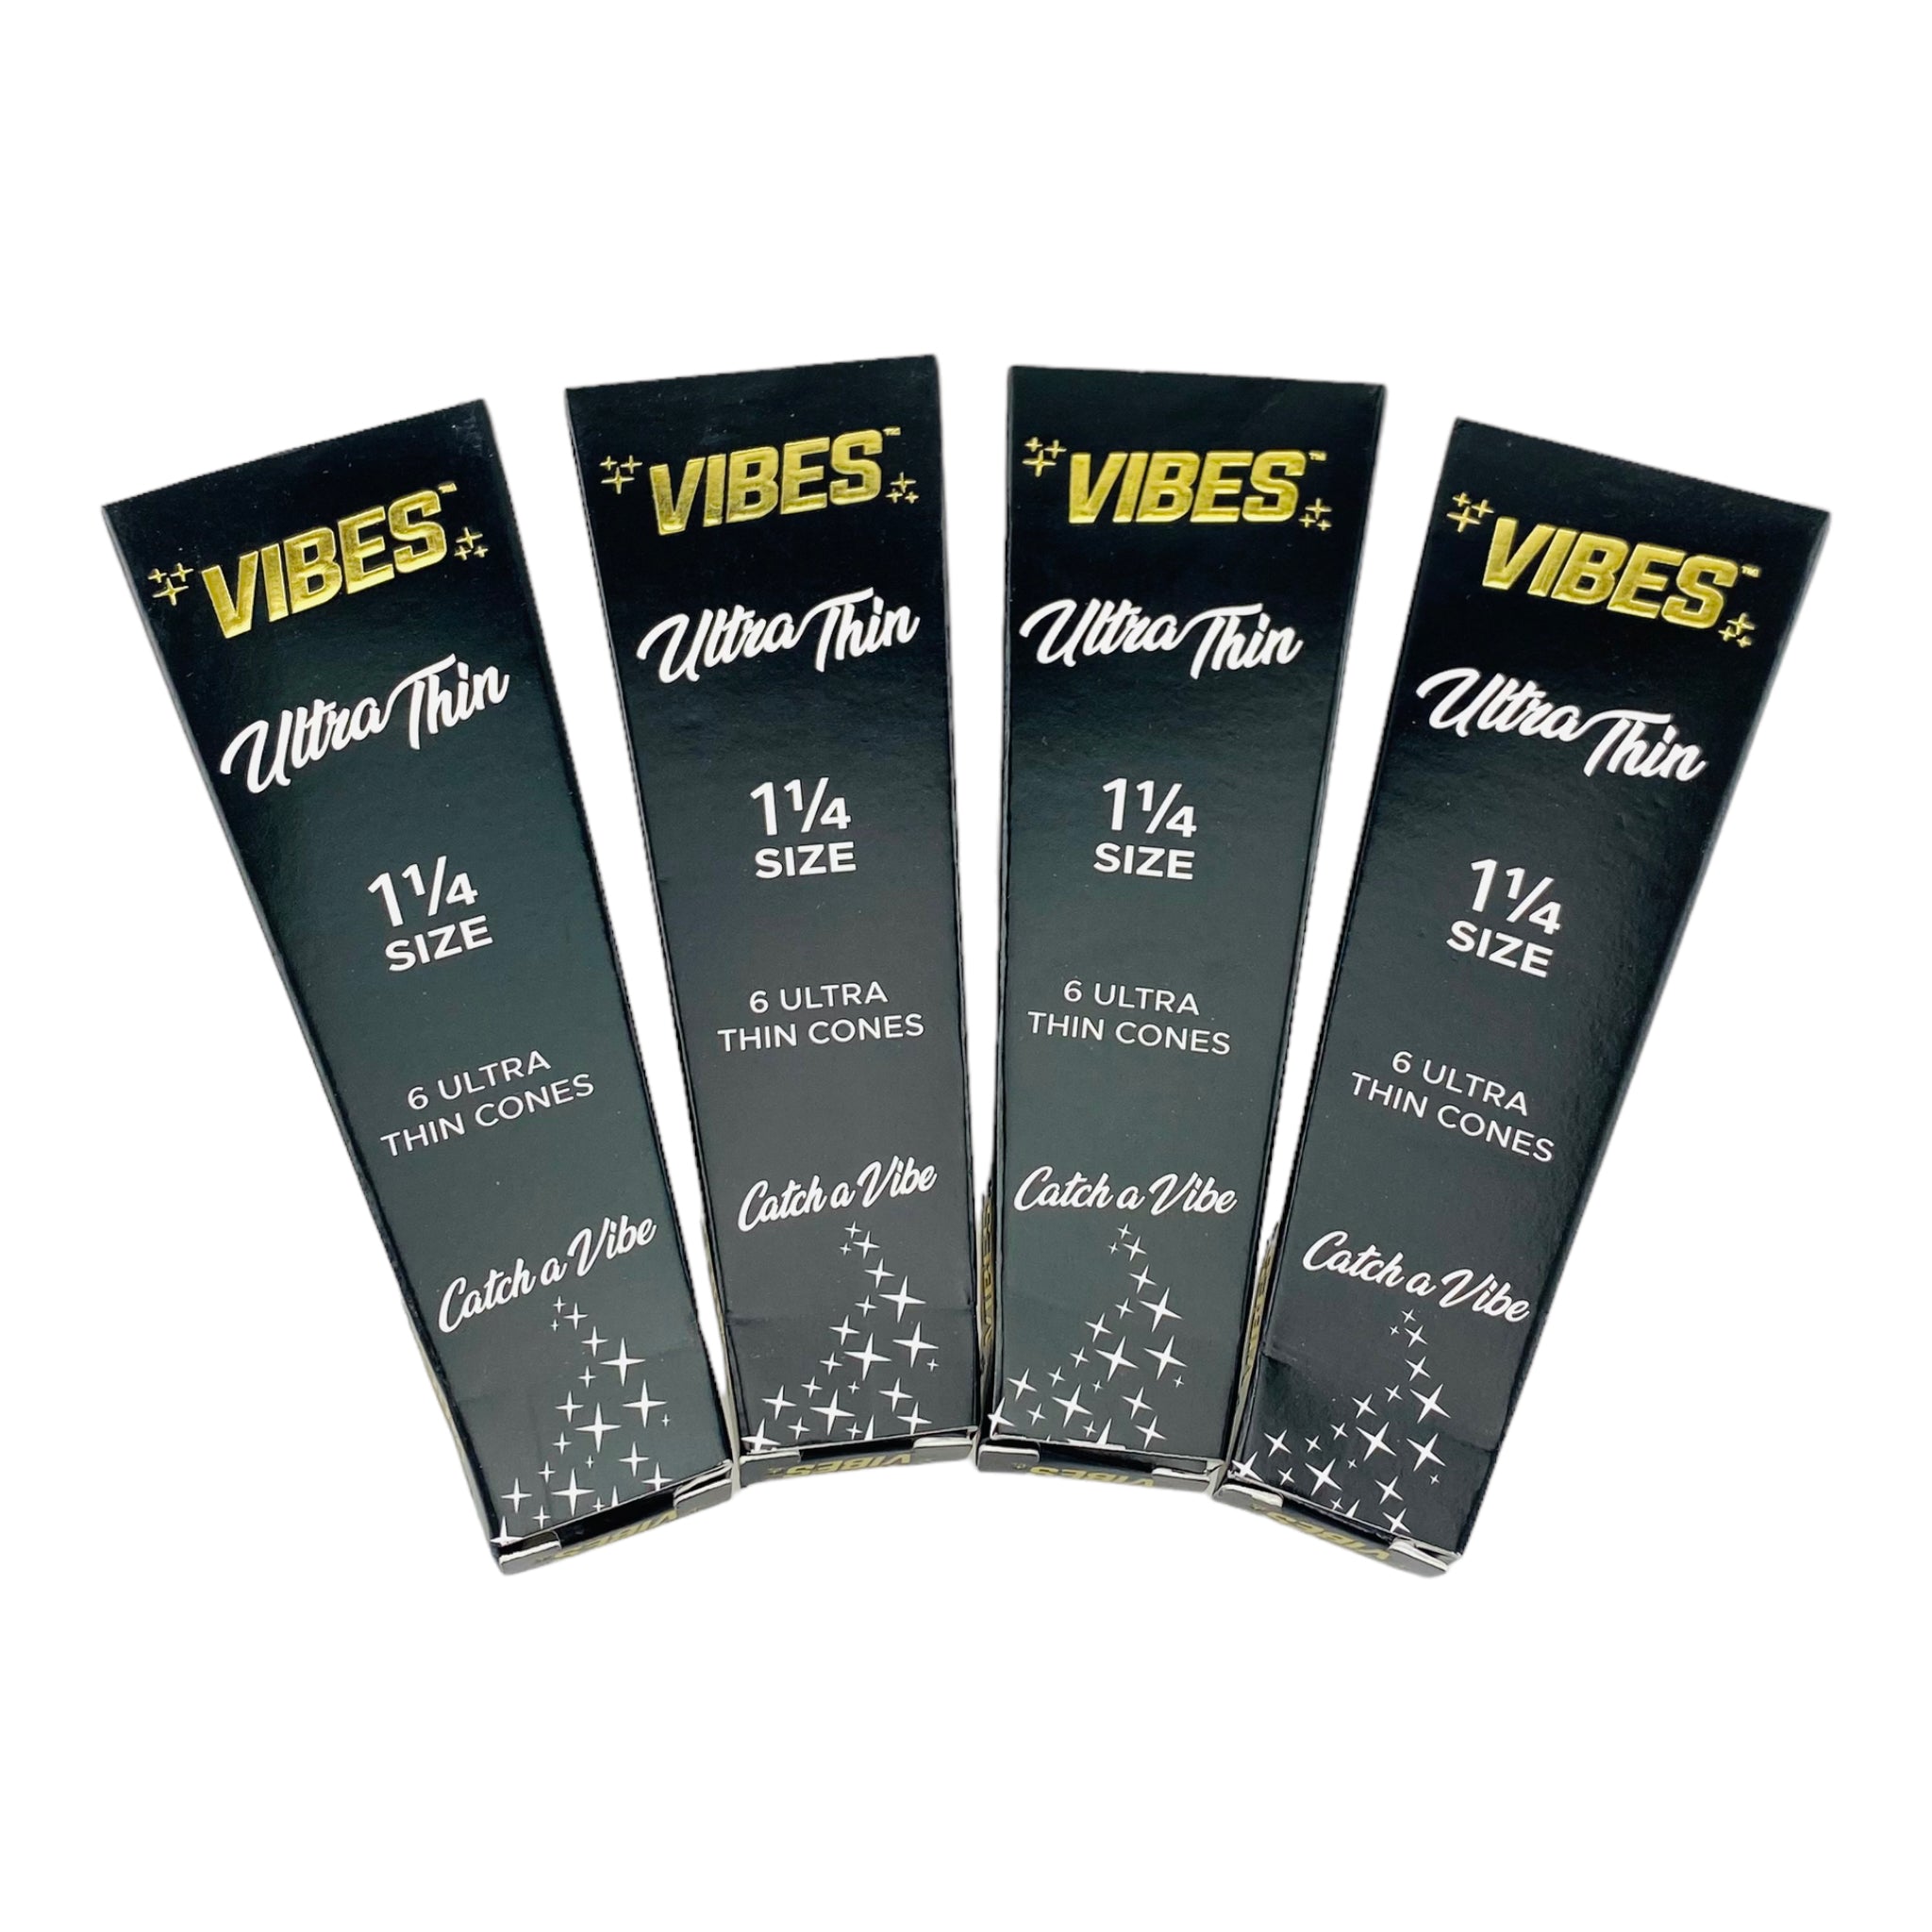 VIBES Ultra Thin 1-1/4 Cones